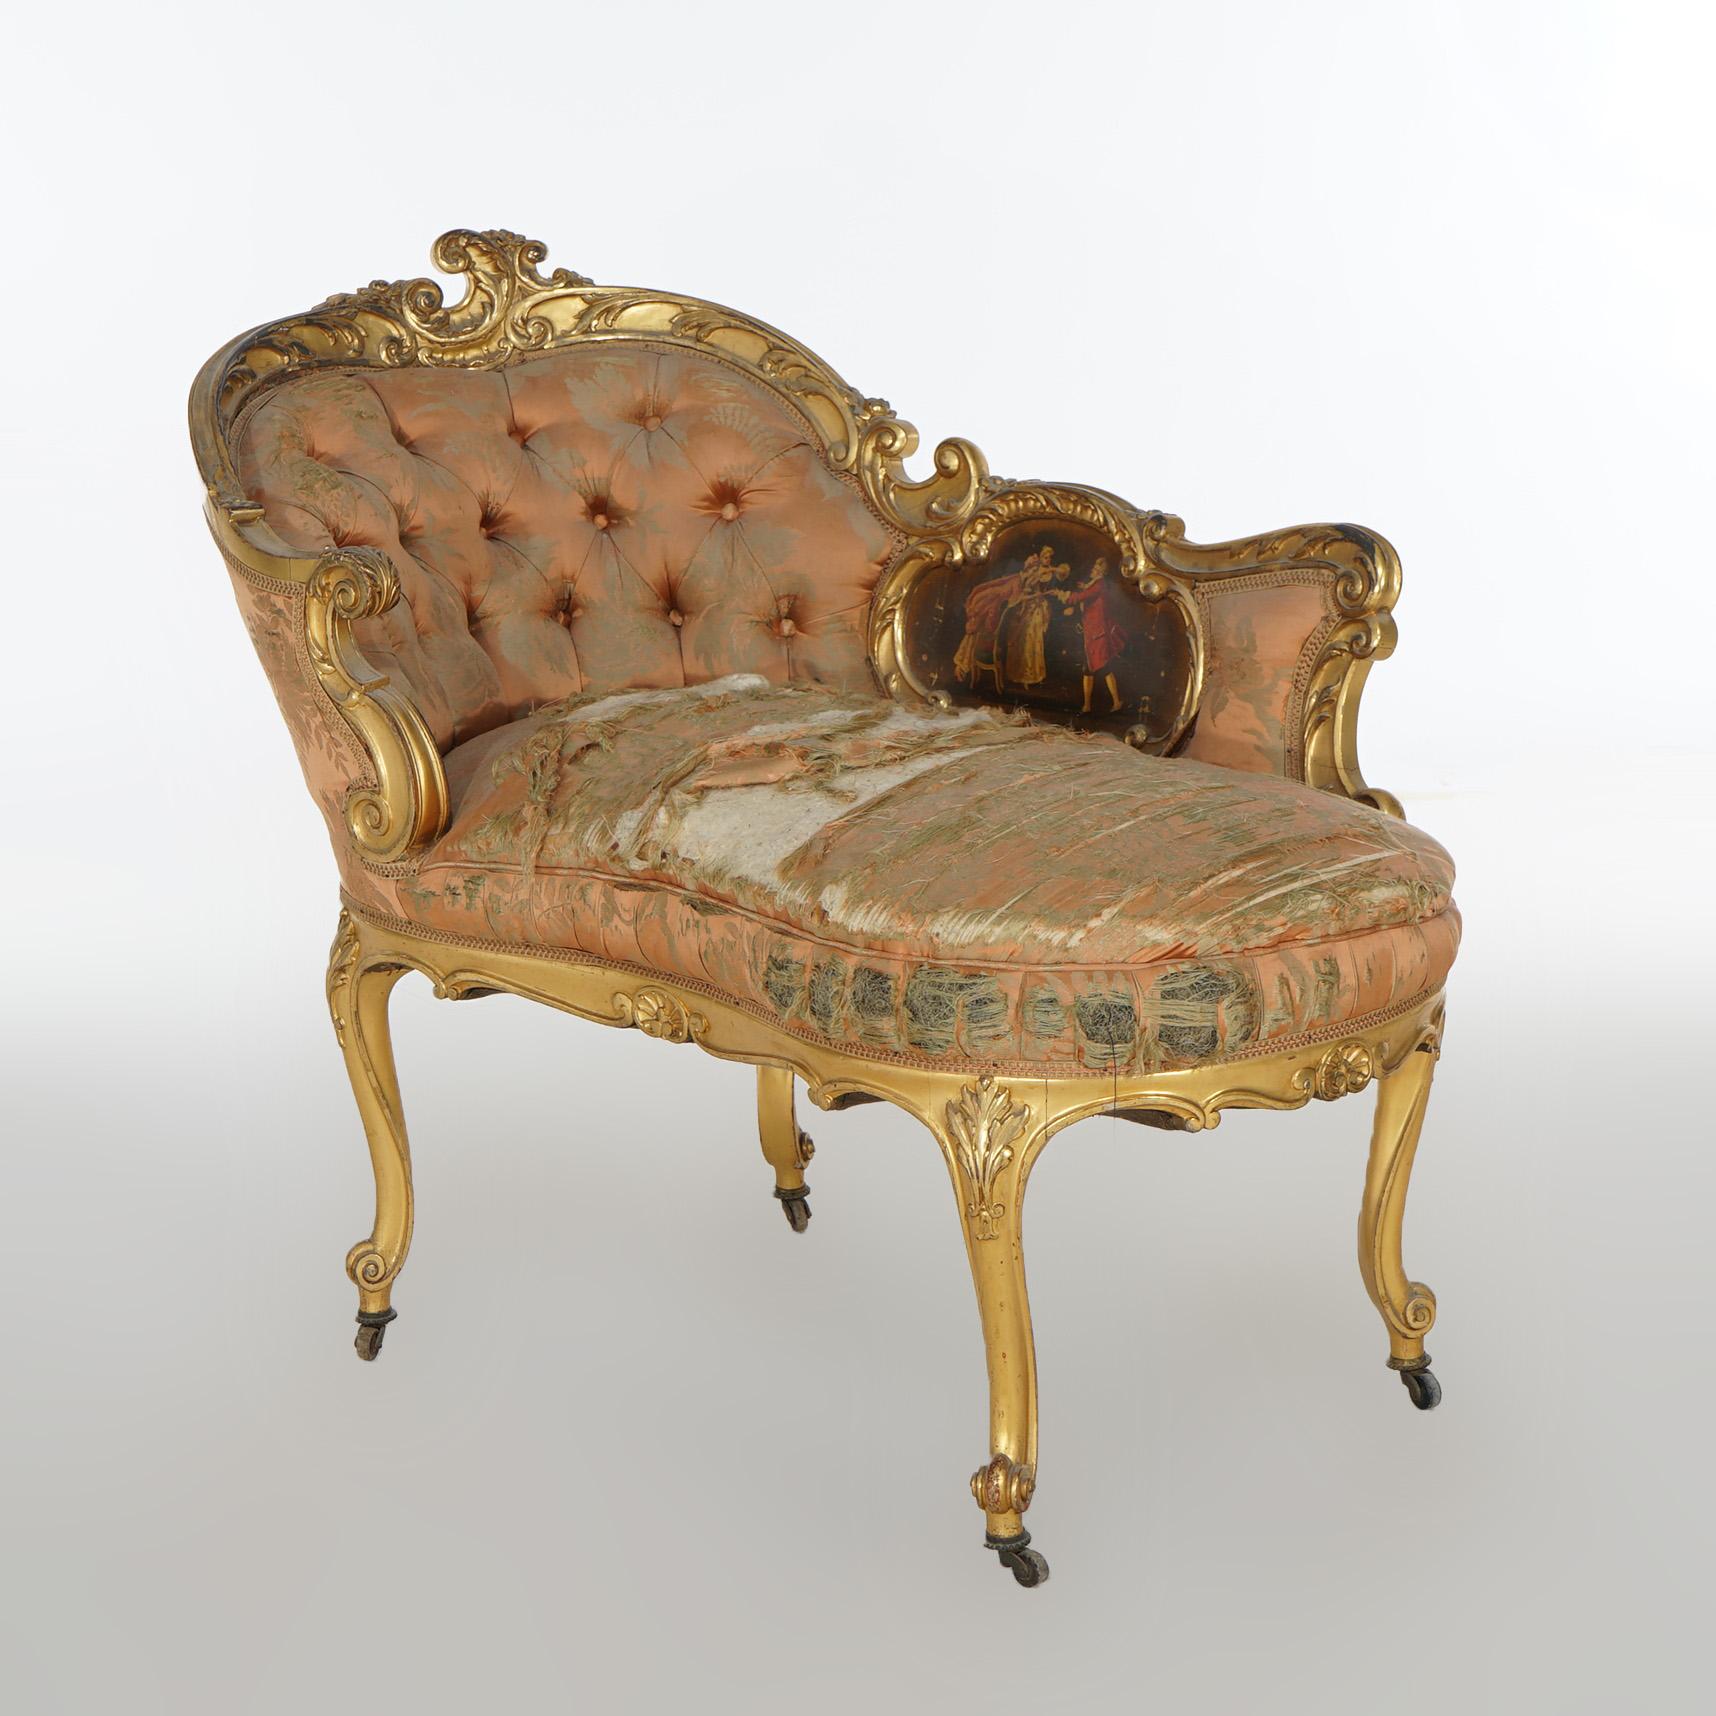 Early Antique French Rococo Vernis Martin & Giltwood Half-Recamier Settee 19th C For Sale 12